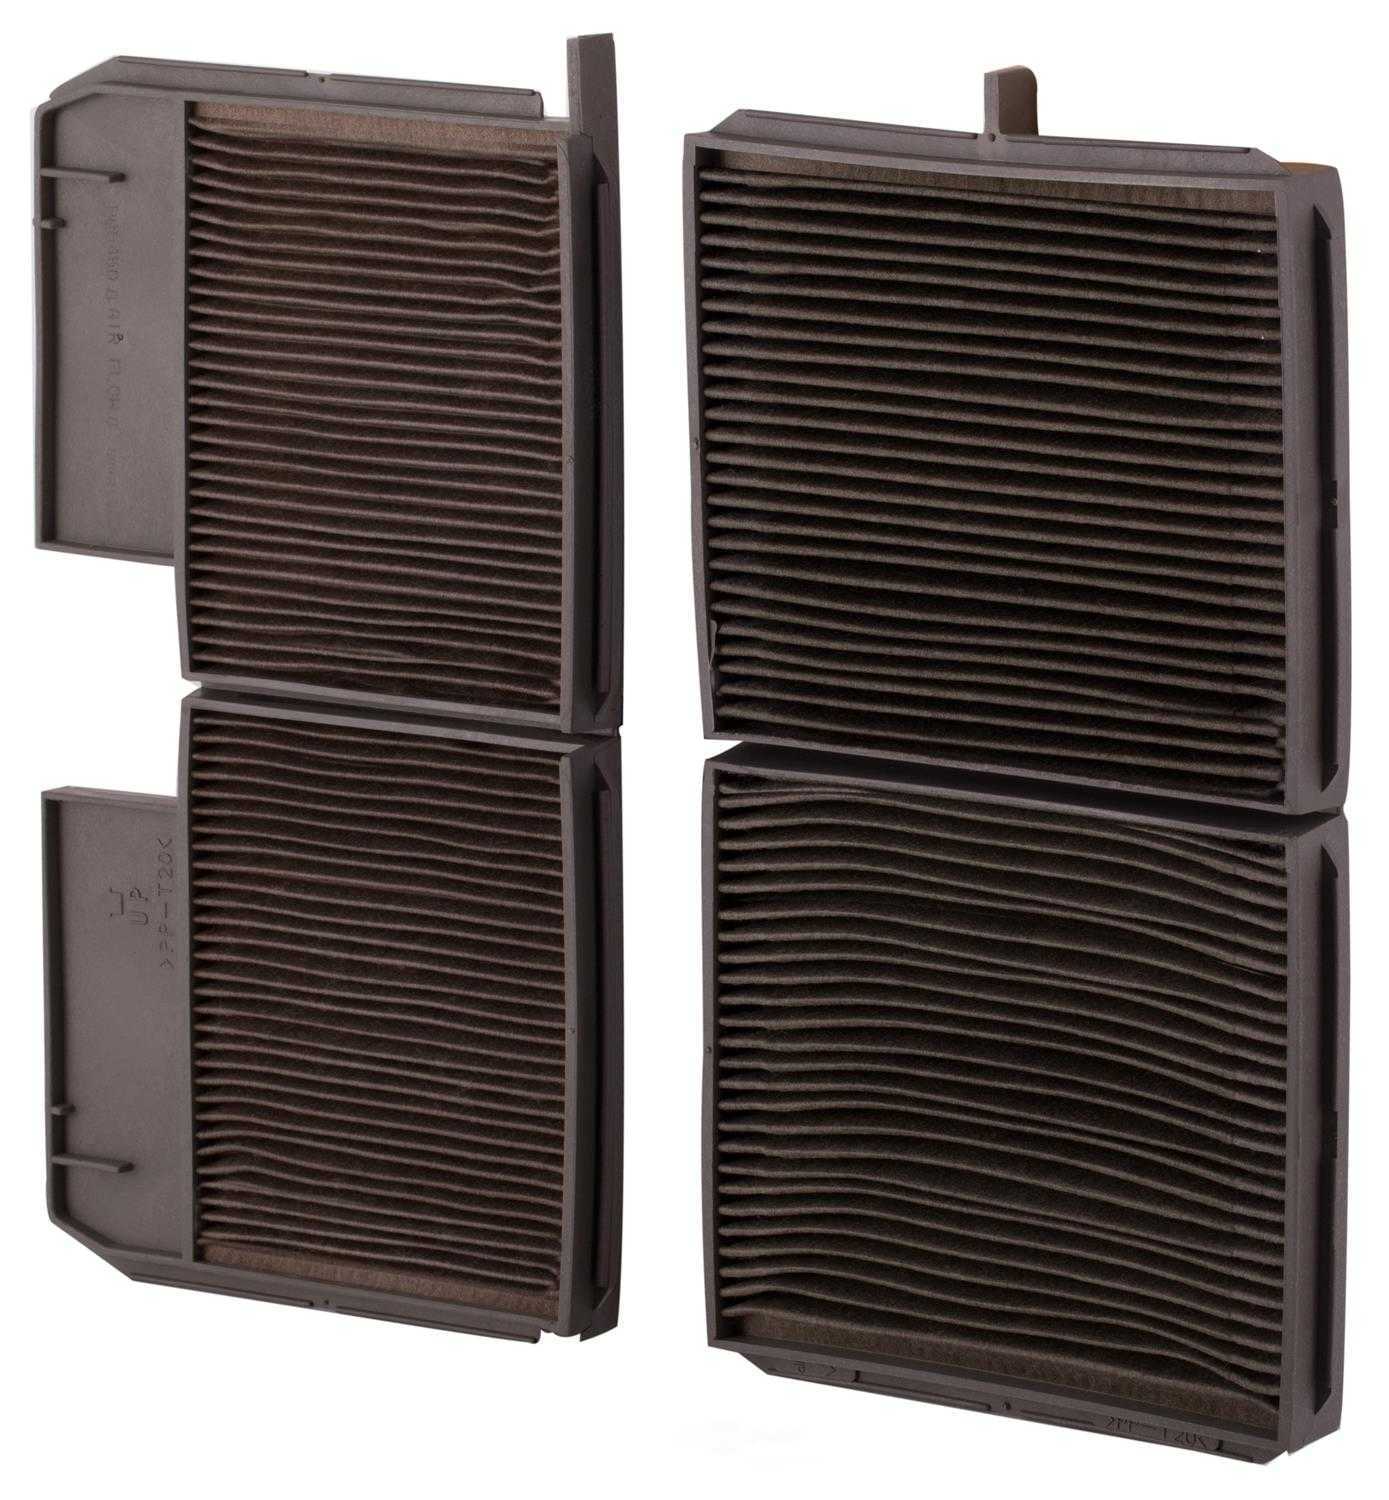 PARTS PLUS FILTERS BY PREMIUM GUARD - Charcoal Media - PLF CAF5450